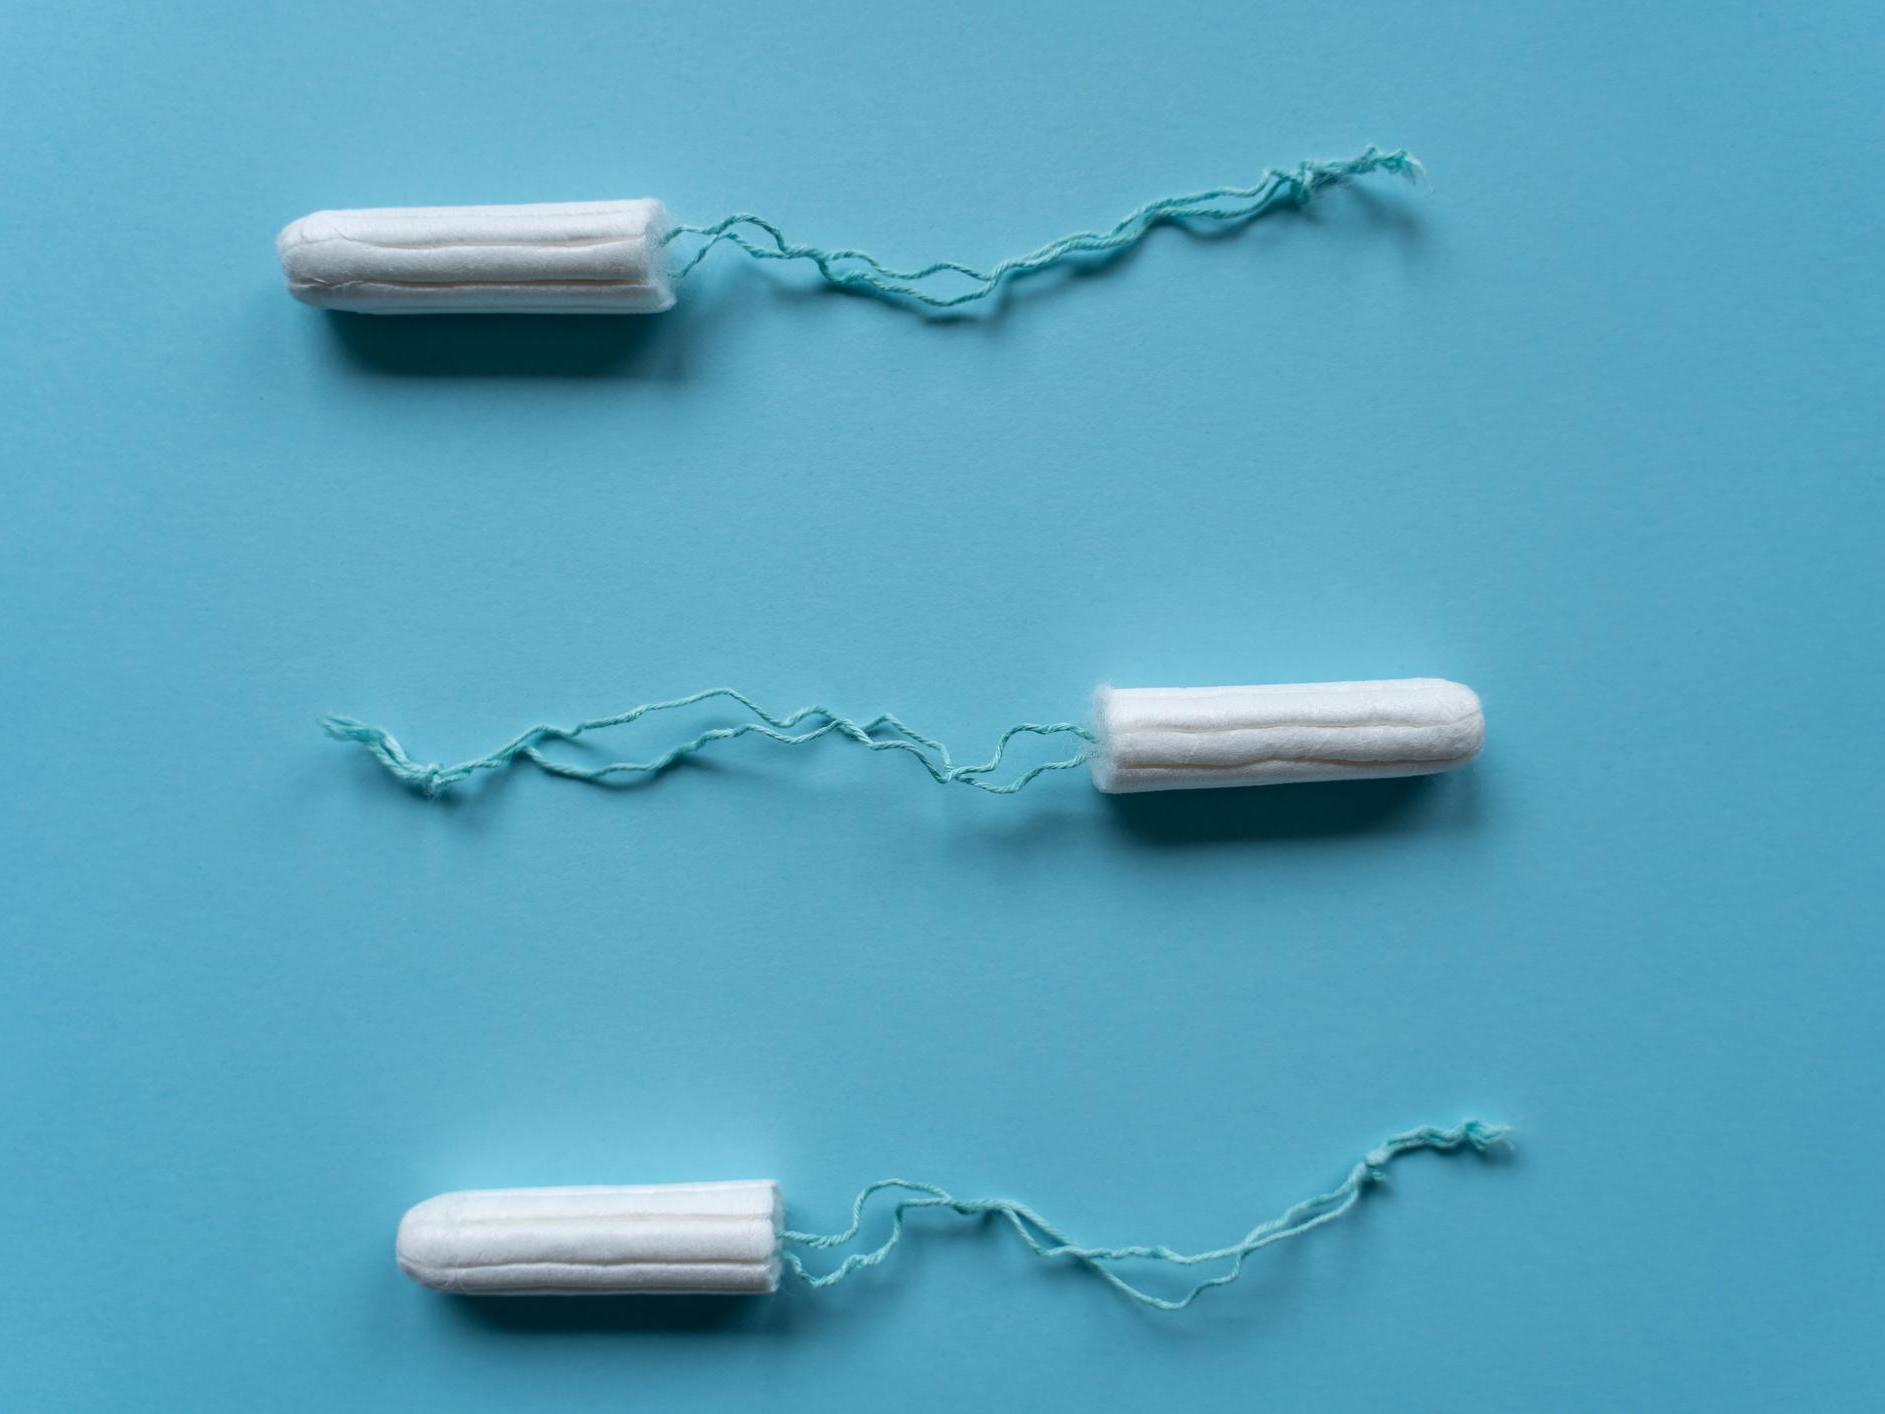 Scotland is set to become the first country in the world to provide free tampons and sanitary pads